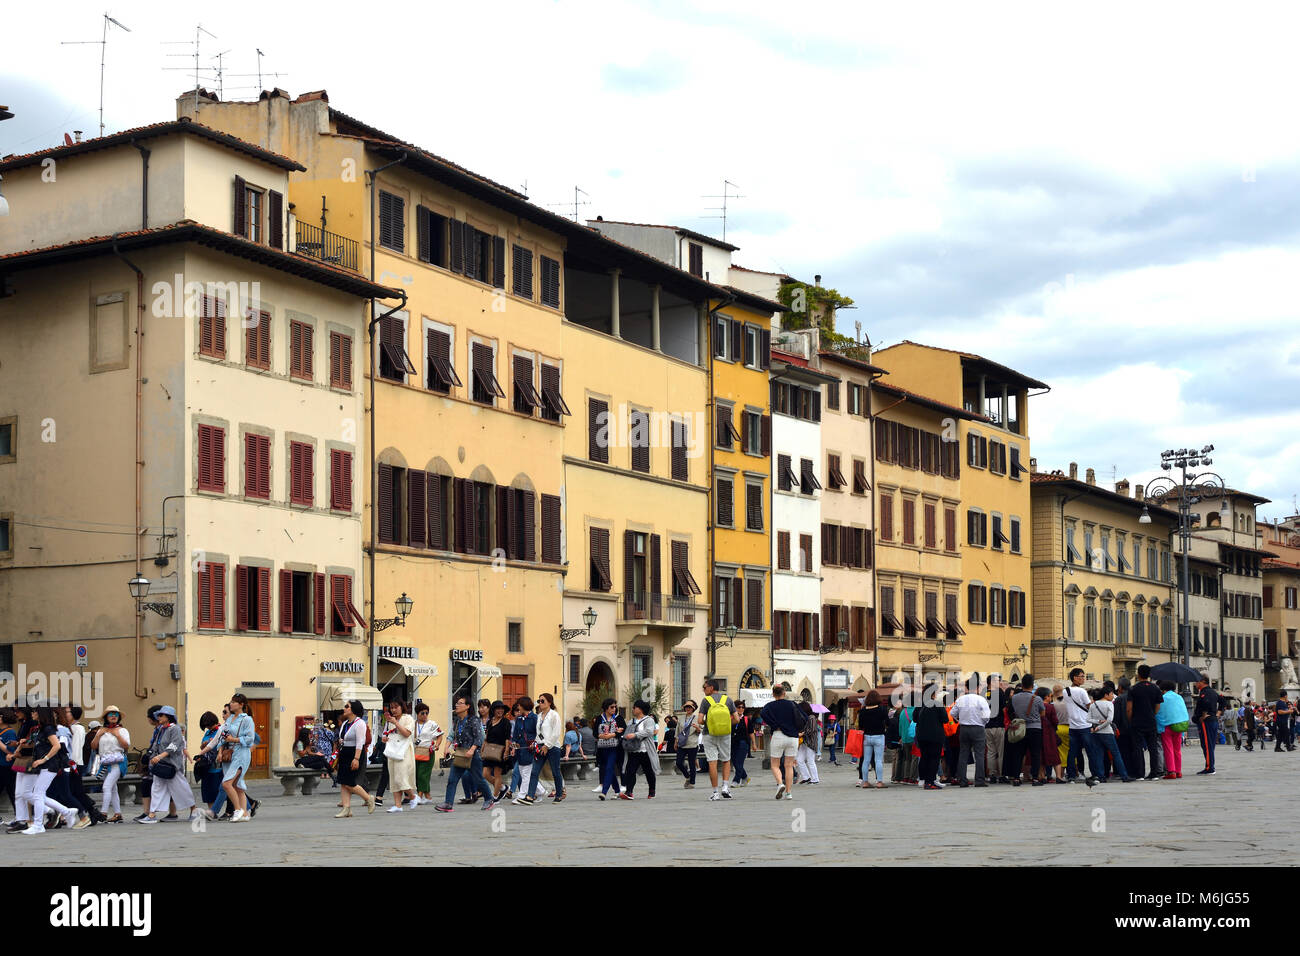 Florence, Tuscany, Italy - September 14, 2017: Tourists on the Piazza Santa Croce in Florence - Italy. Stock Photo